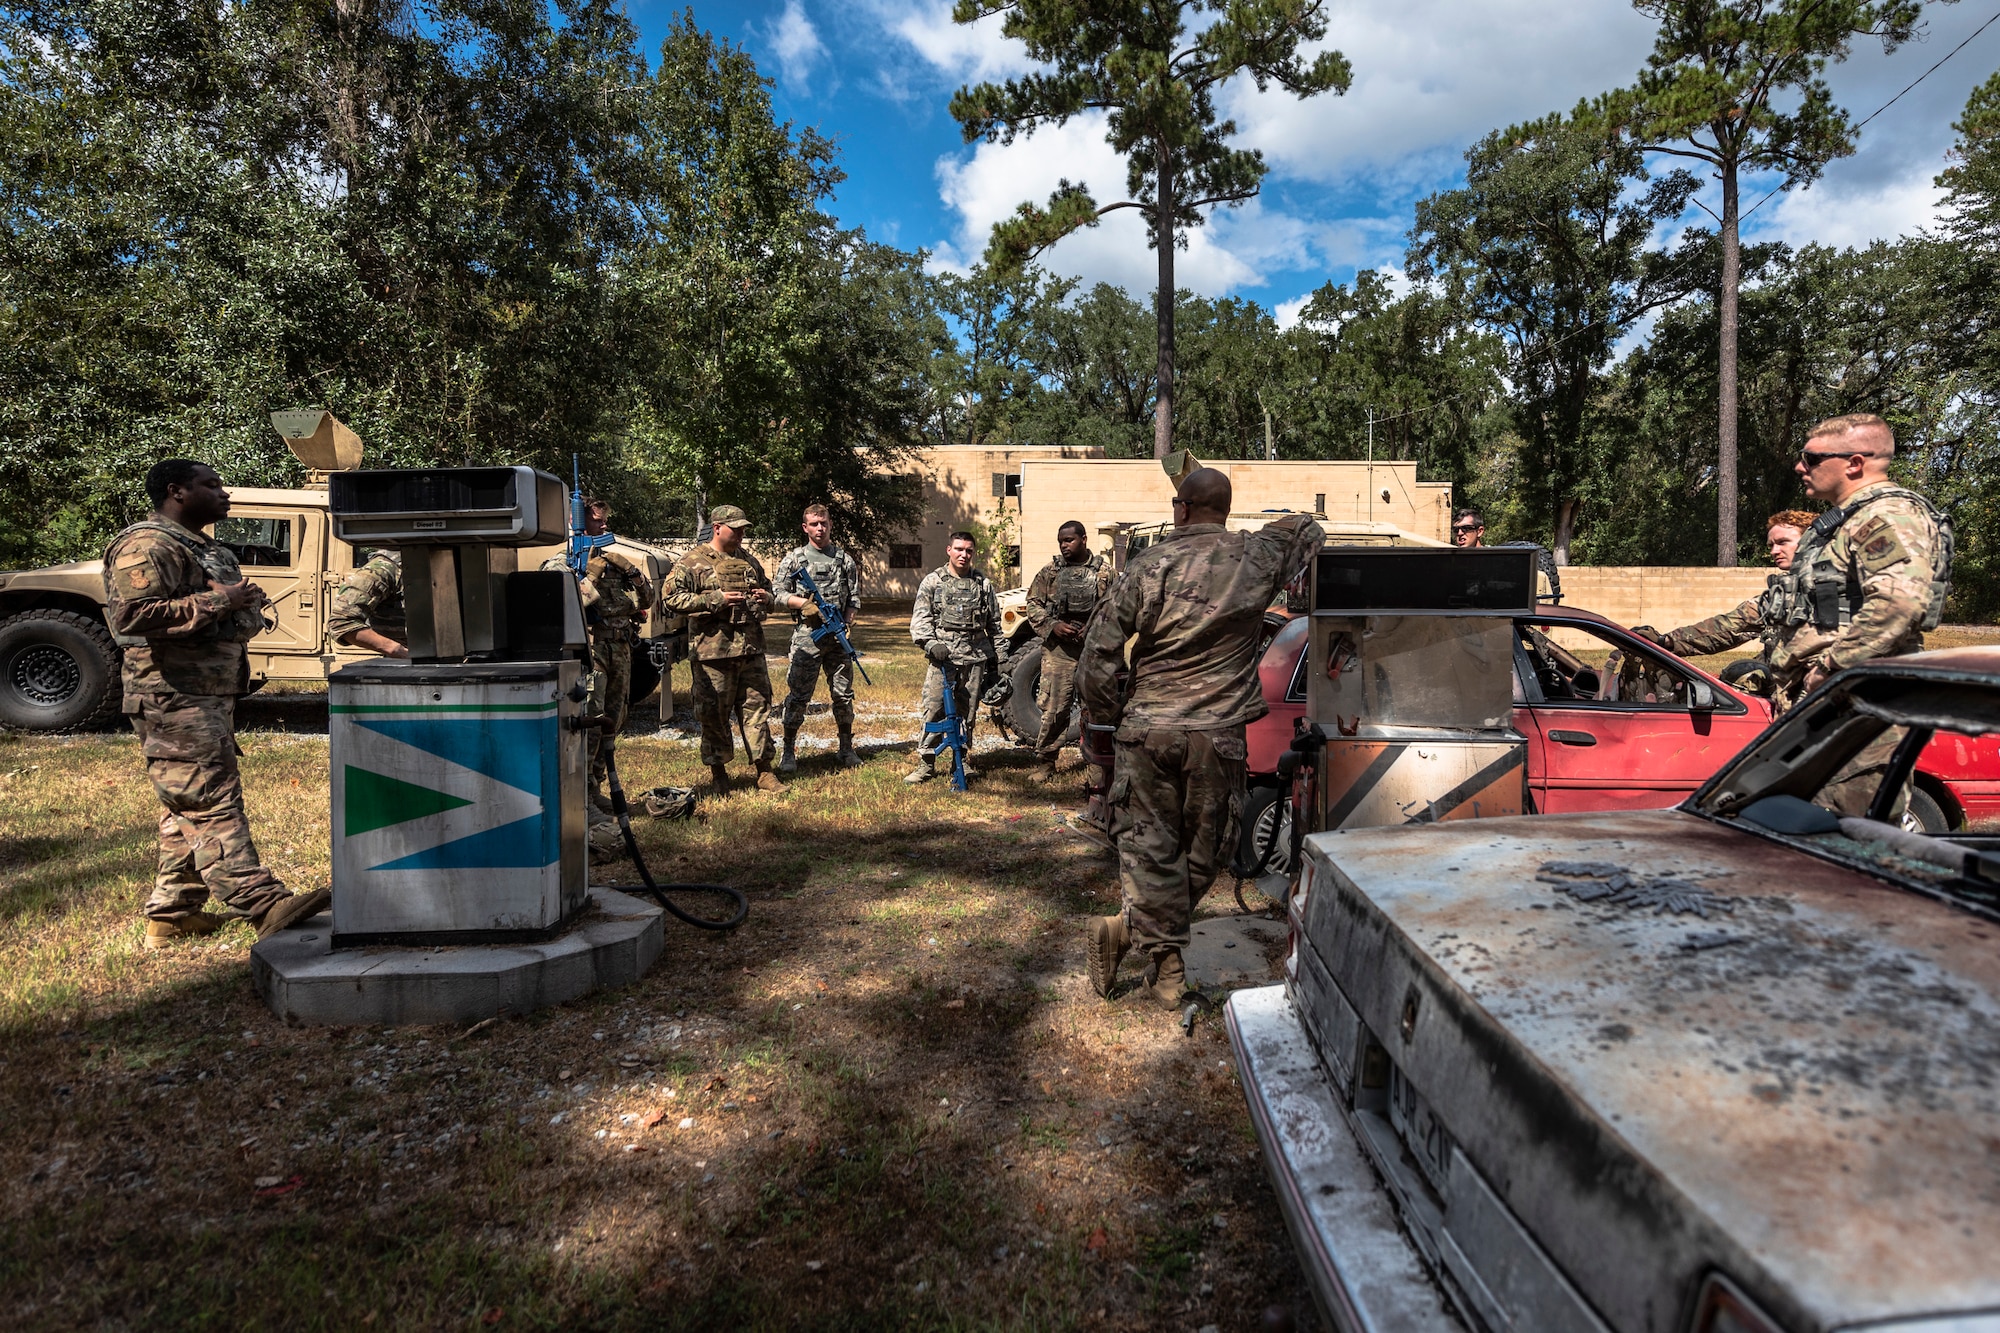 Airmen with the 23d Security Forces Squadron (SFS) conduct a debrief after a field convoy operation Oct. 8, 2019, at Moody Air Force Base, Ga. The field convoy operation gave 23d SFS Airmen an opportunity to improve the ability to shoot, move and communicate, ensuring the Airmen are properly trained and prepared to carry out their mission in a contested environment. (U.S. Air Force photo by Airman 1st Class Taryn Butler)